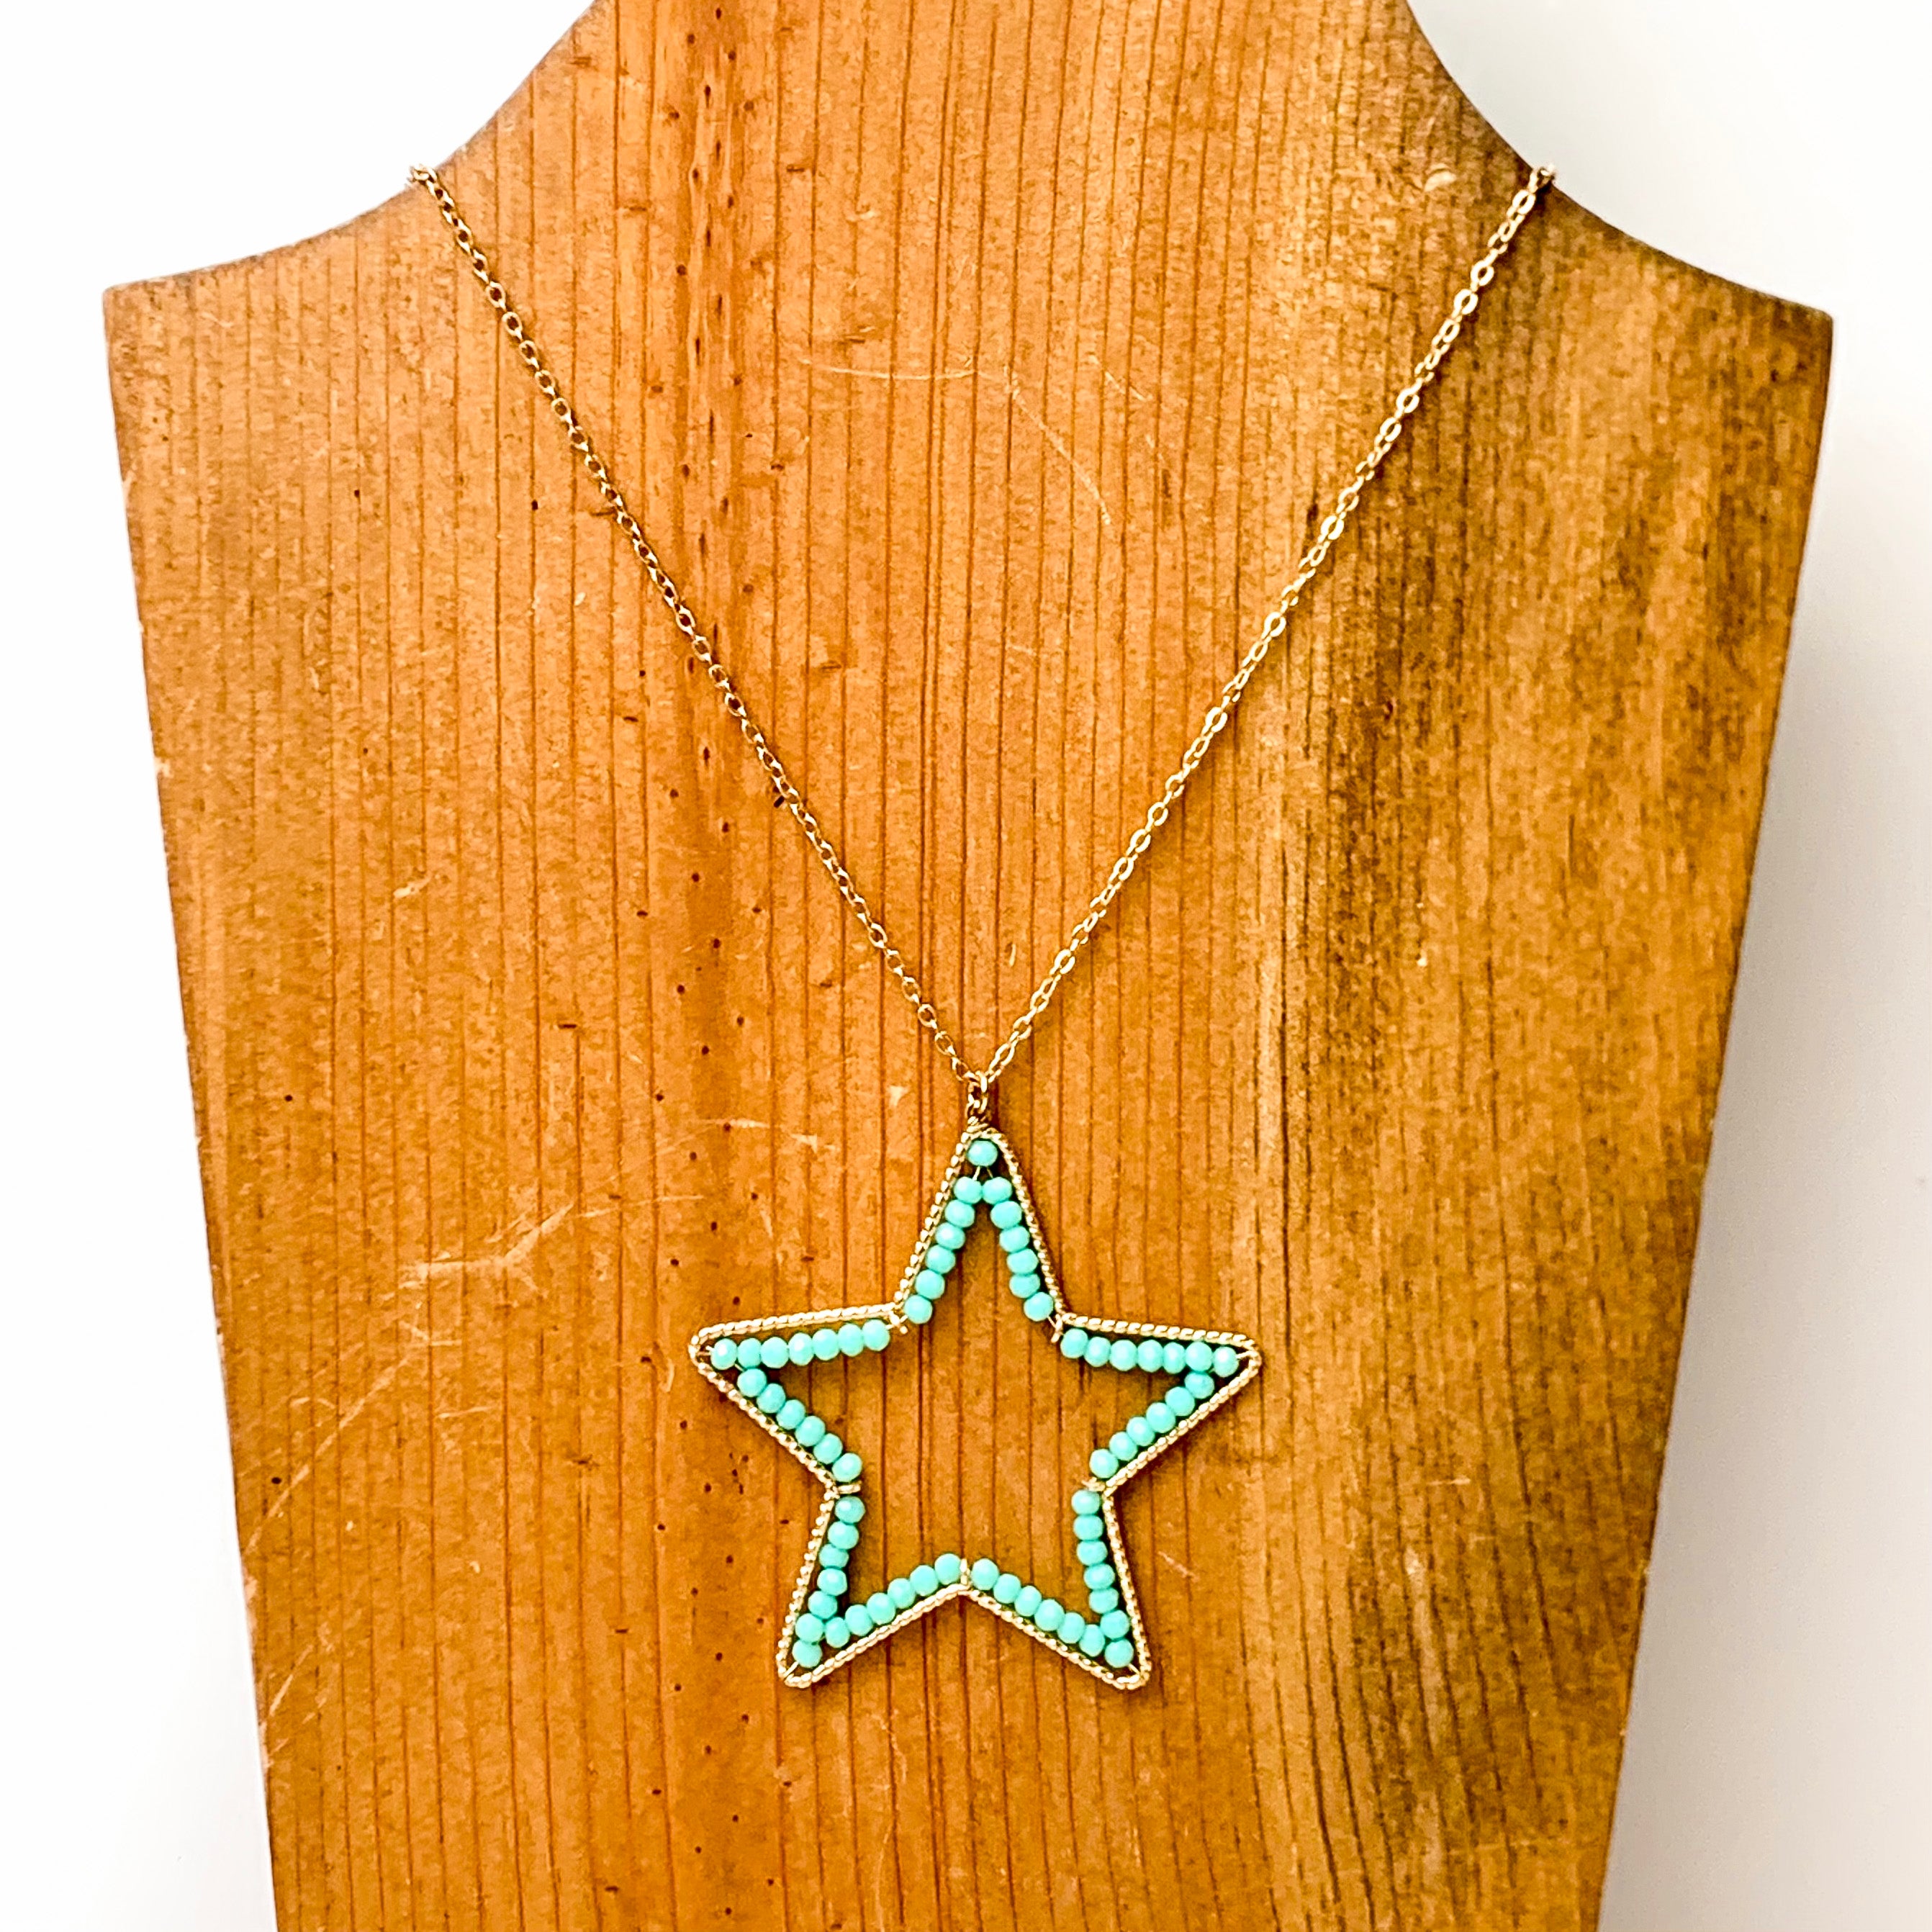 Star Spangled Beaded Gold Necklace in Aqua - Giddy Up Glamour Boutique